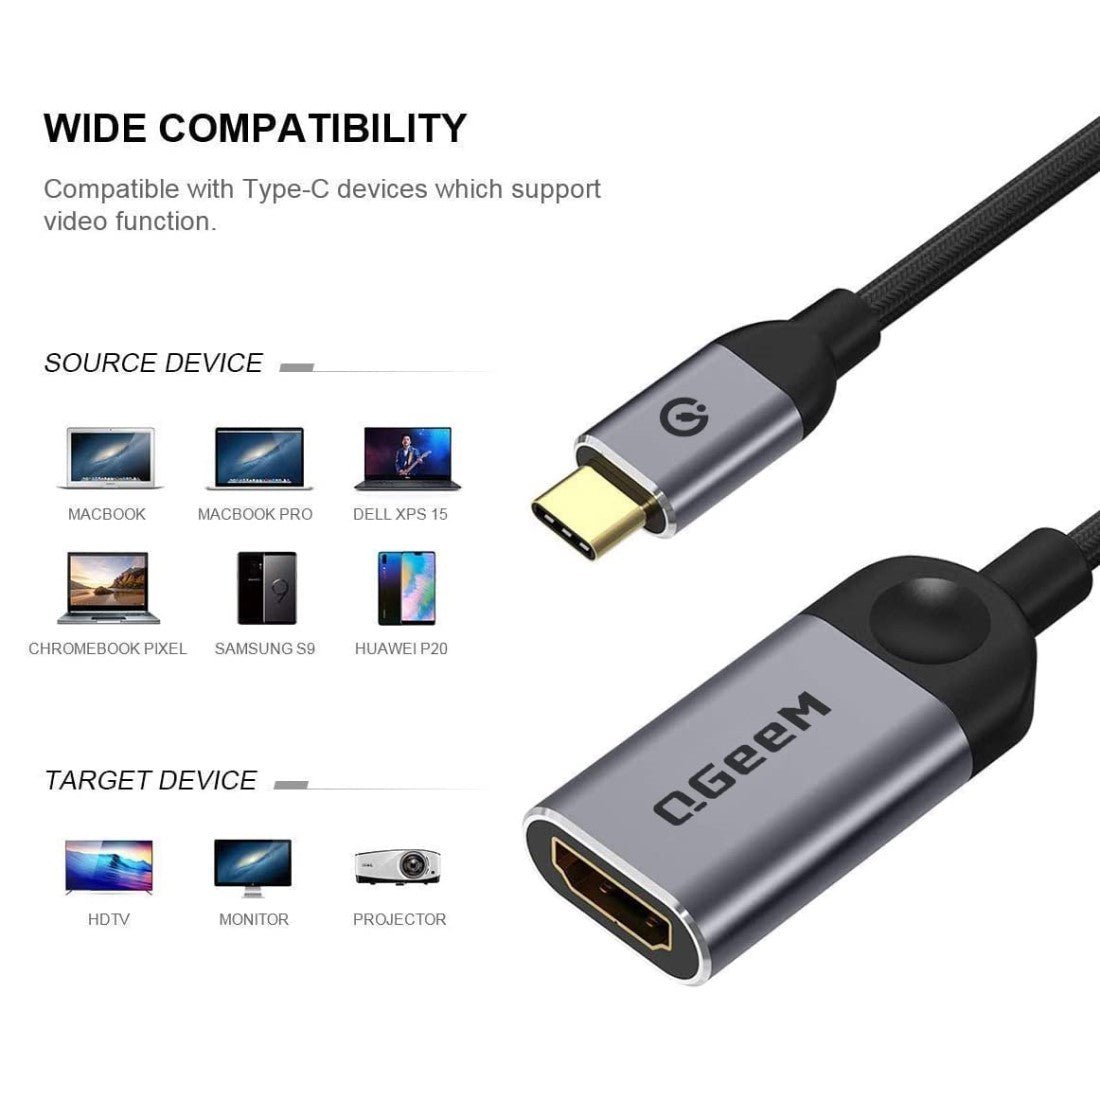 How to use a Samsung USB-C to HDMI adapter?